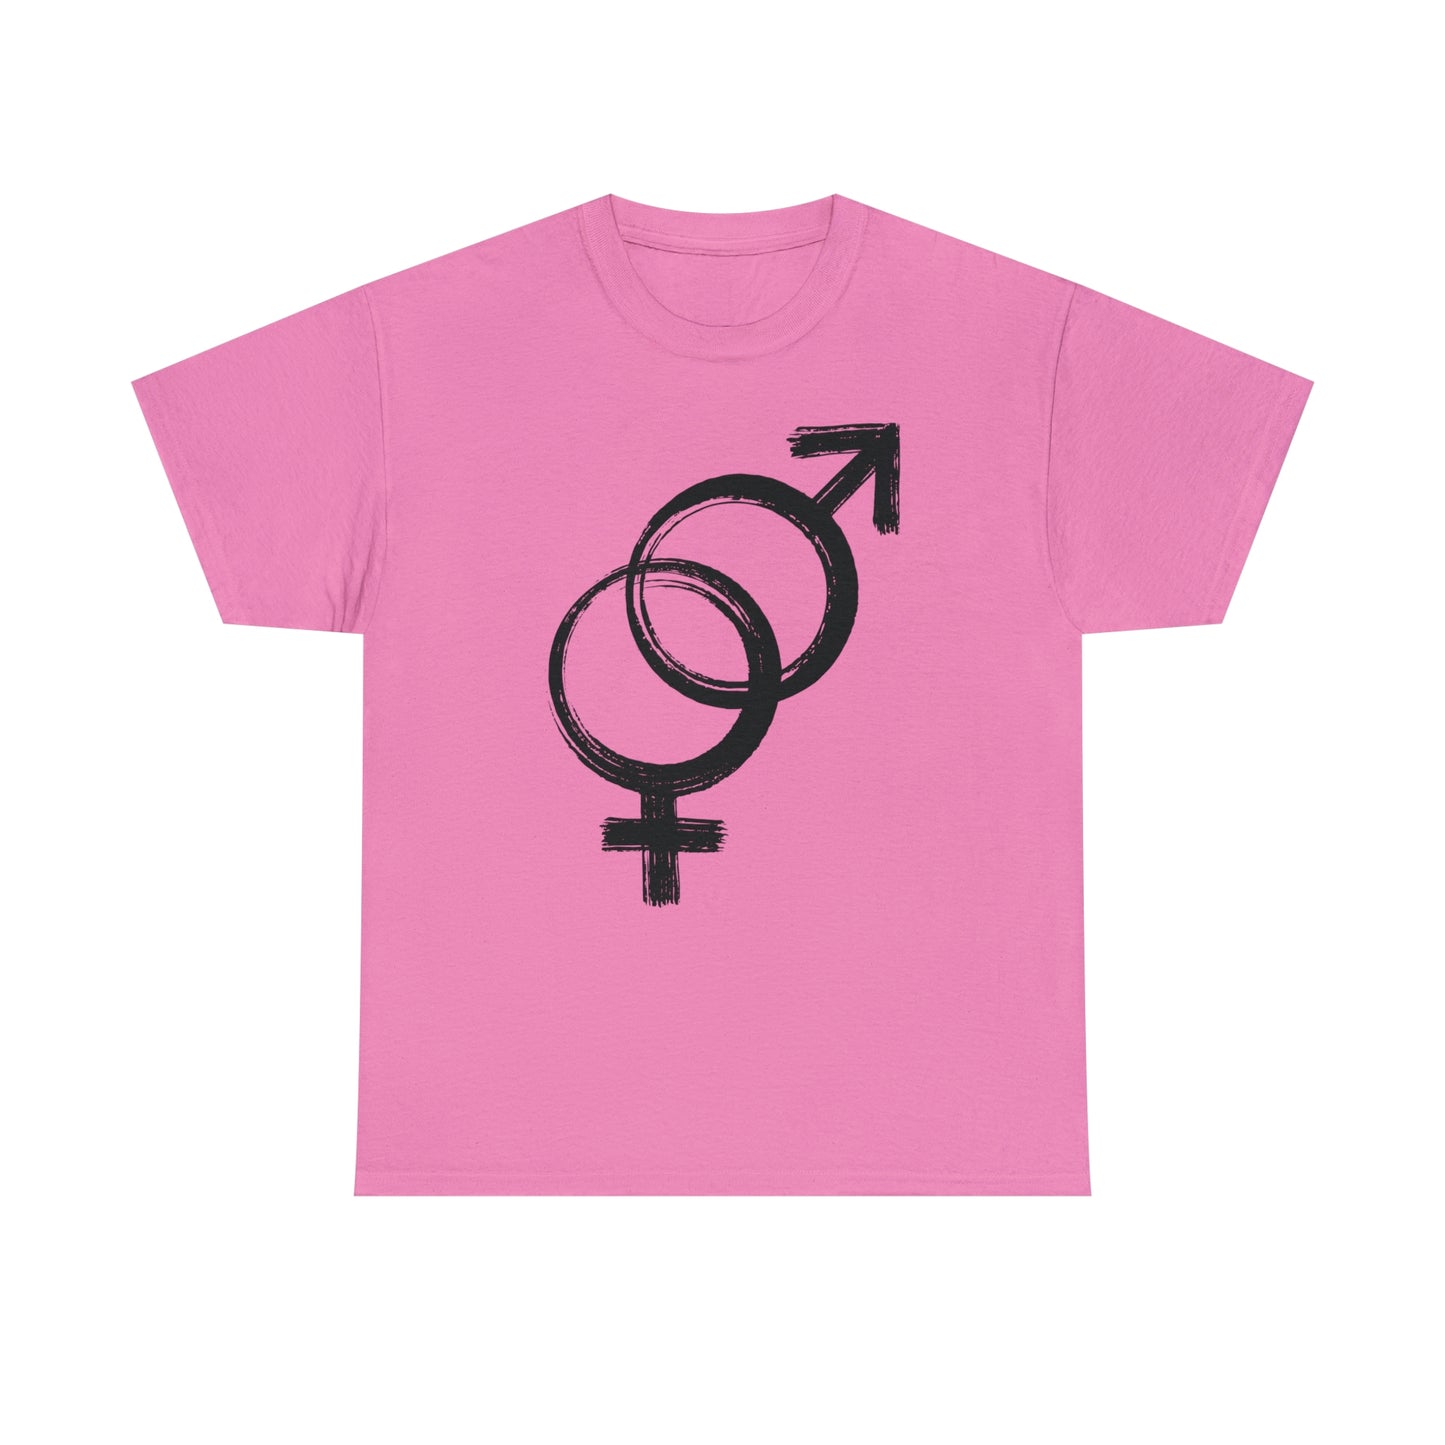 Heterosexual Symbol T-Shirt For Sexual Preference TShirt For Conservative T Shirt For Straight People Shirt For Men T-Shirts For Women